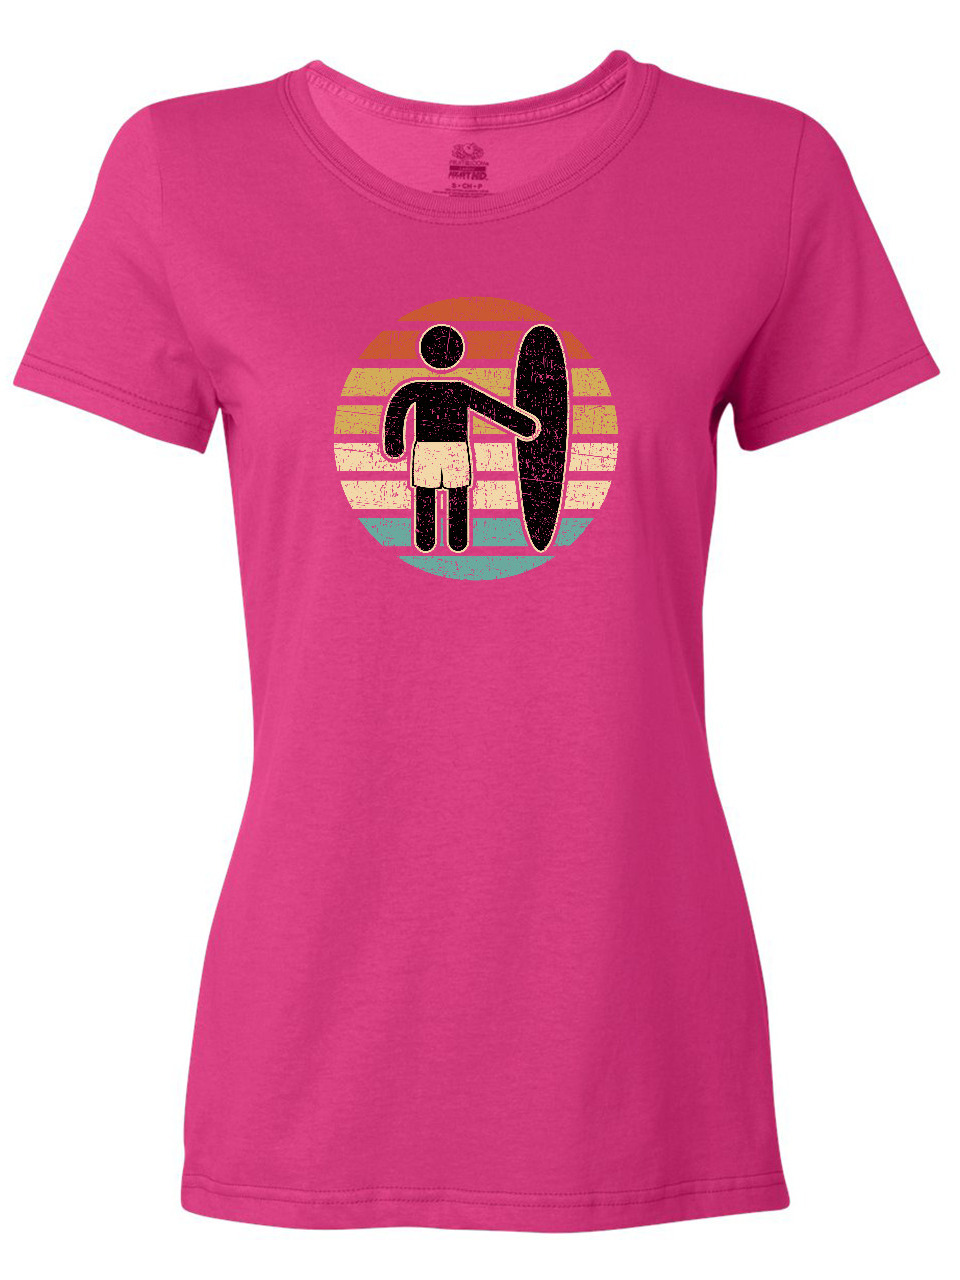 Inktastic Surfing Gift for Surfer Women's T-Shirt - image 1 of 4